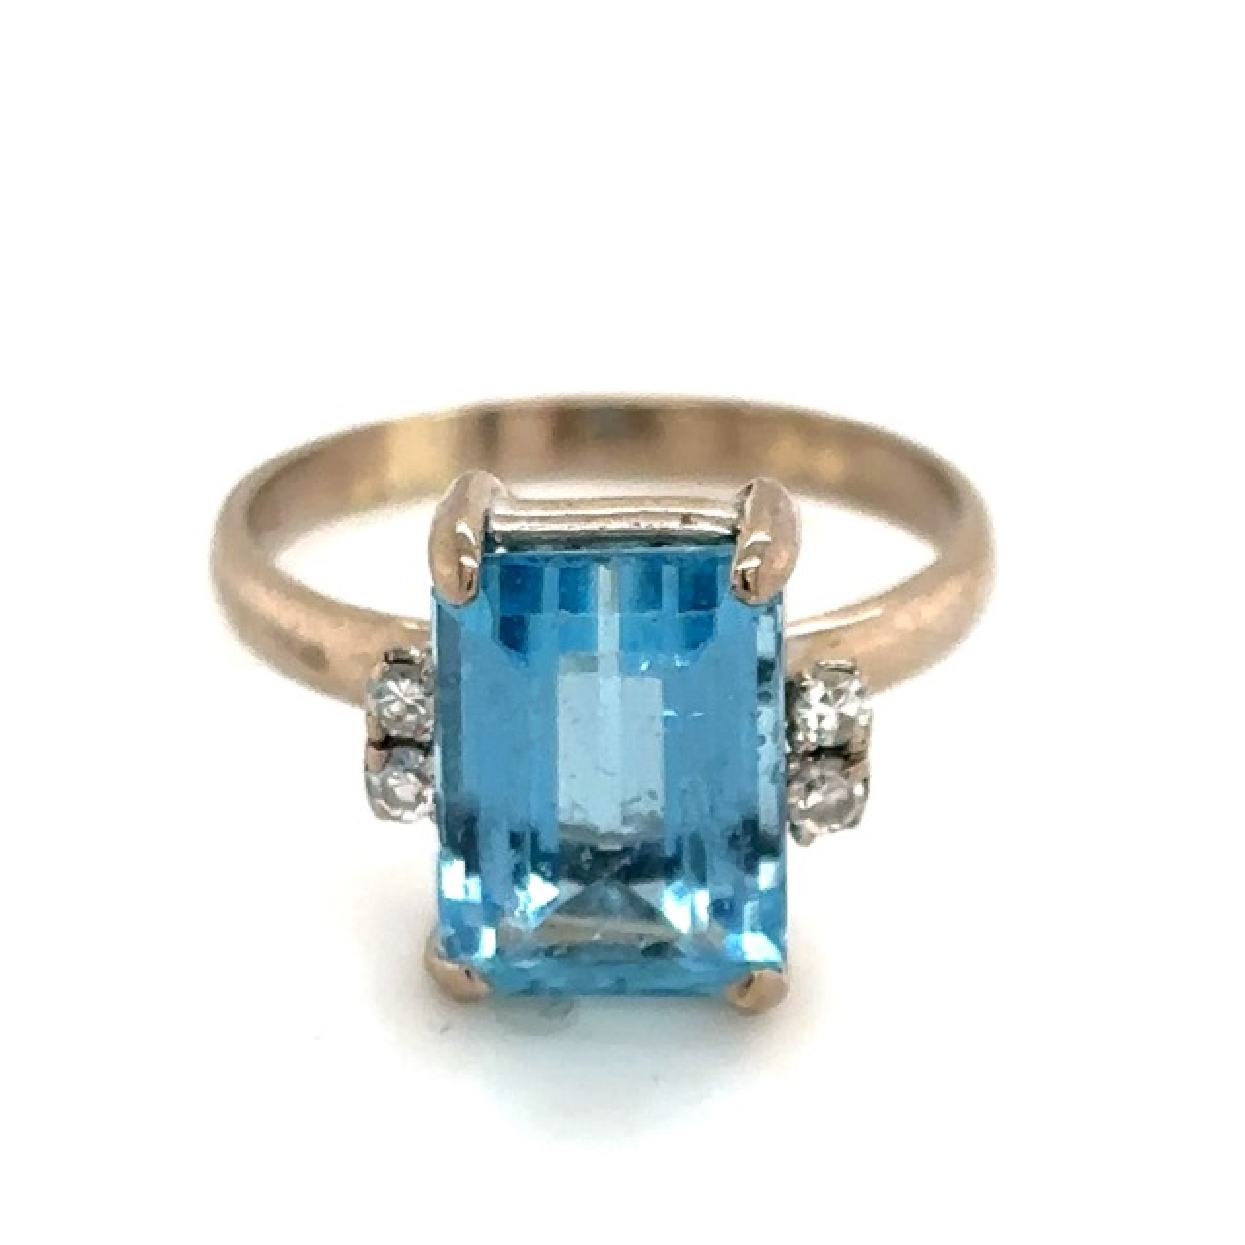 18K White Gold Emerald Cut Blue Topaz with Diamond Accents 

Size 6.25